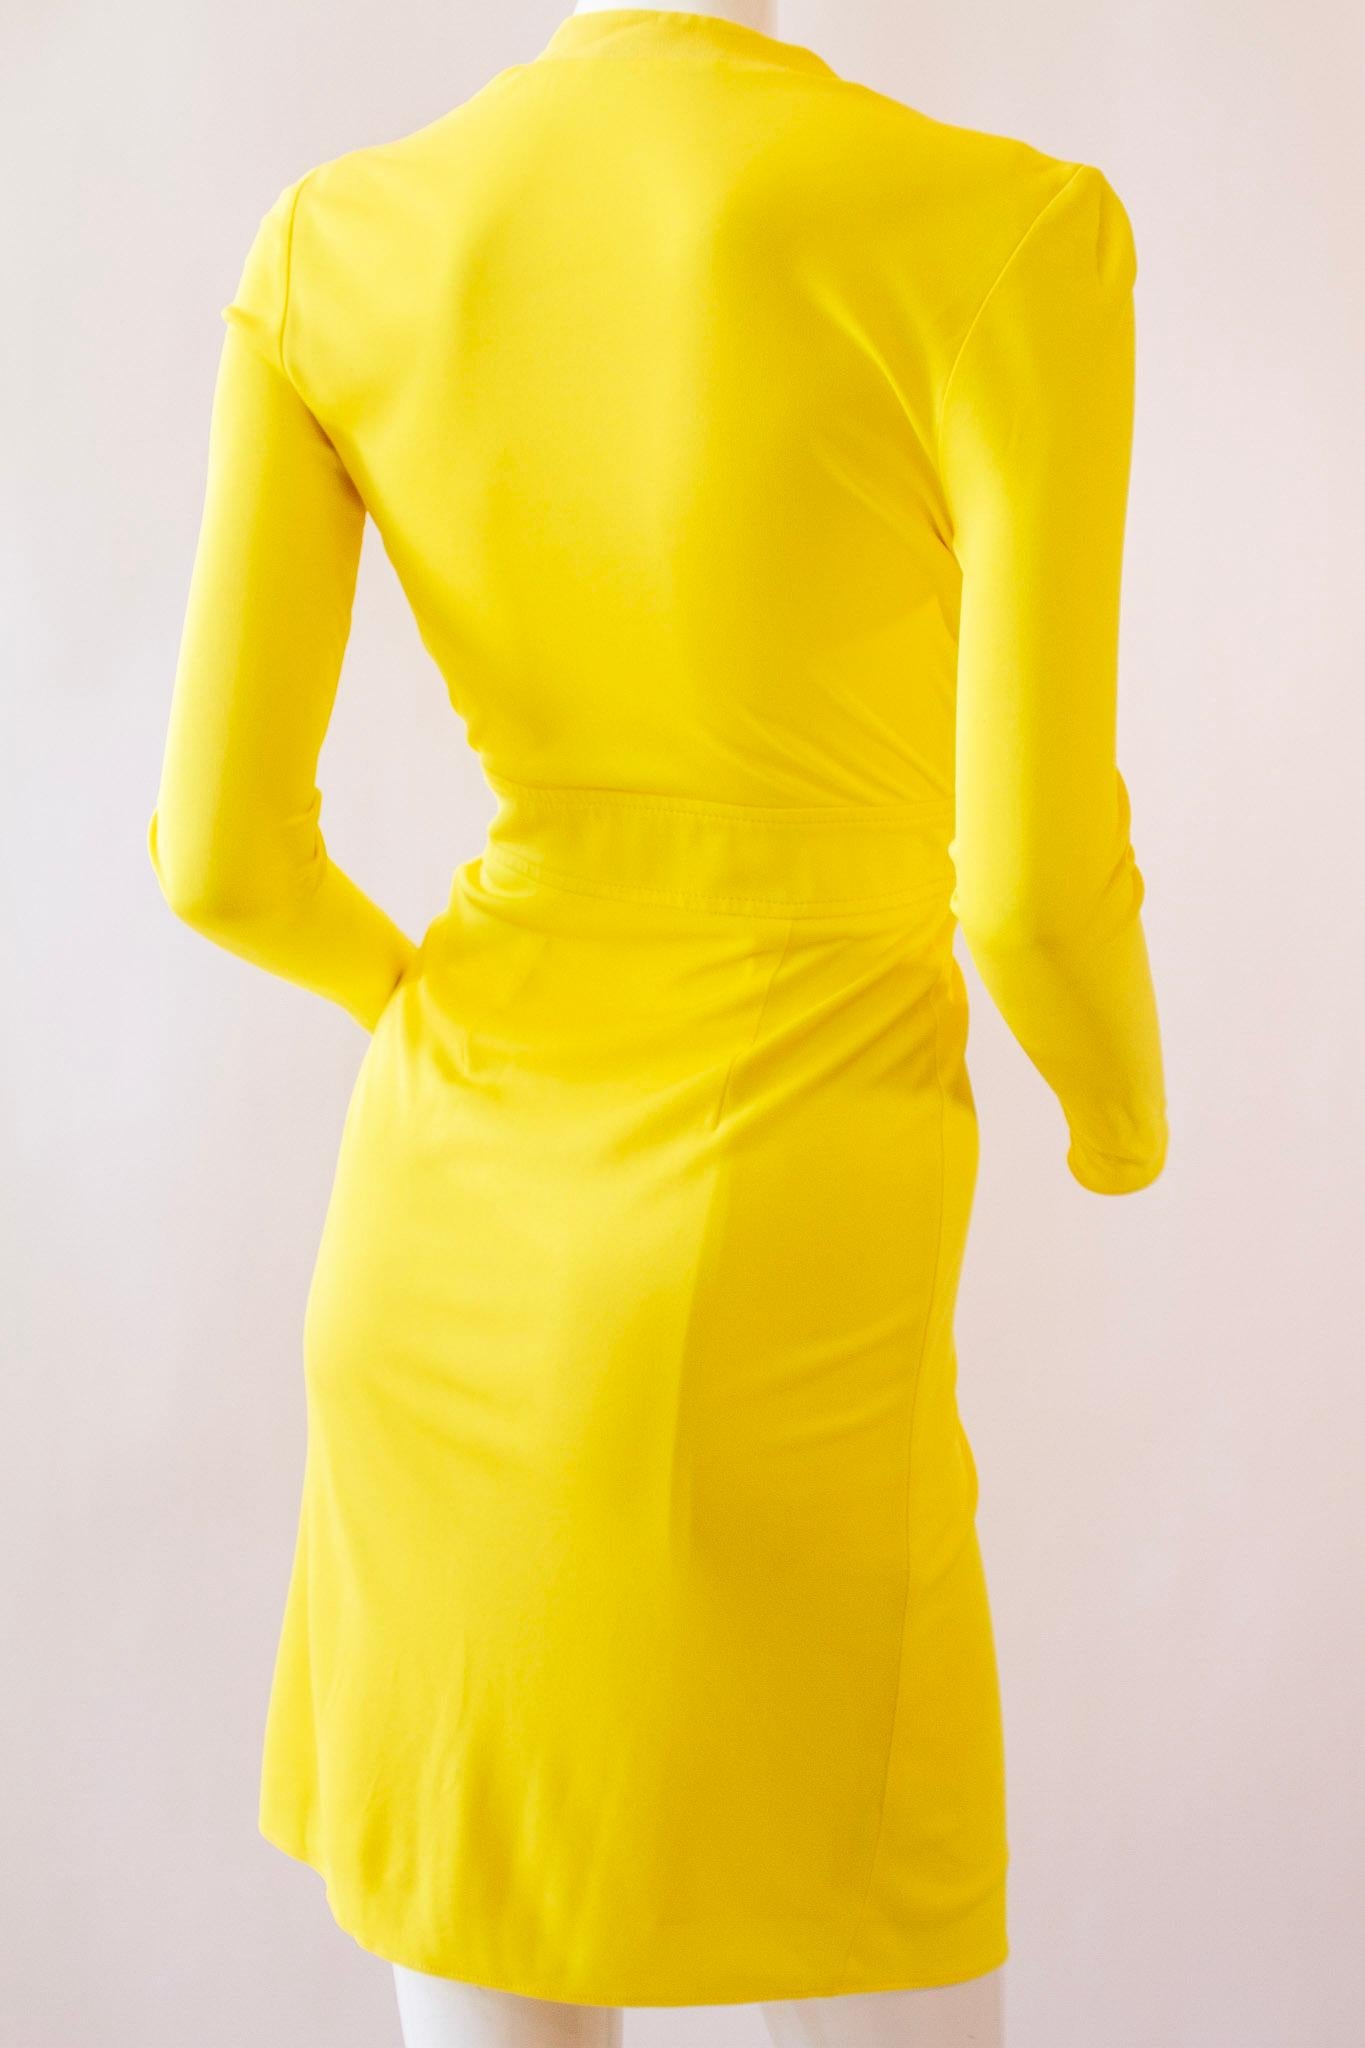 Women's GIANNI VERSACE, Canary Yellow Mid-Length Wrap Dress with Iconic Medusa Fastener For Sale